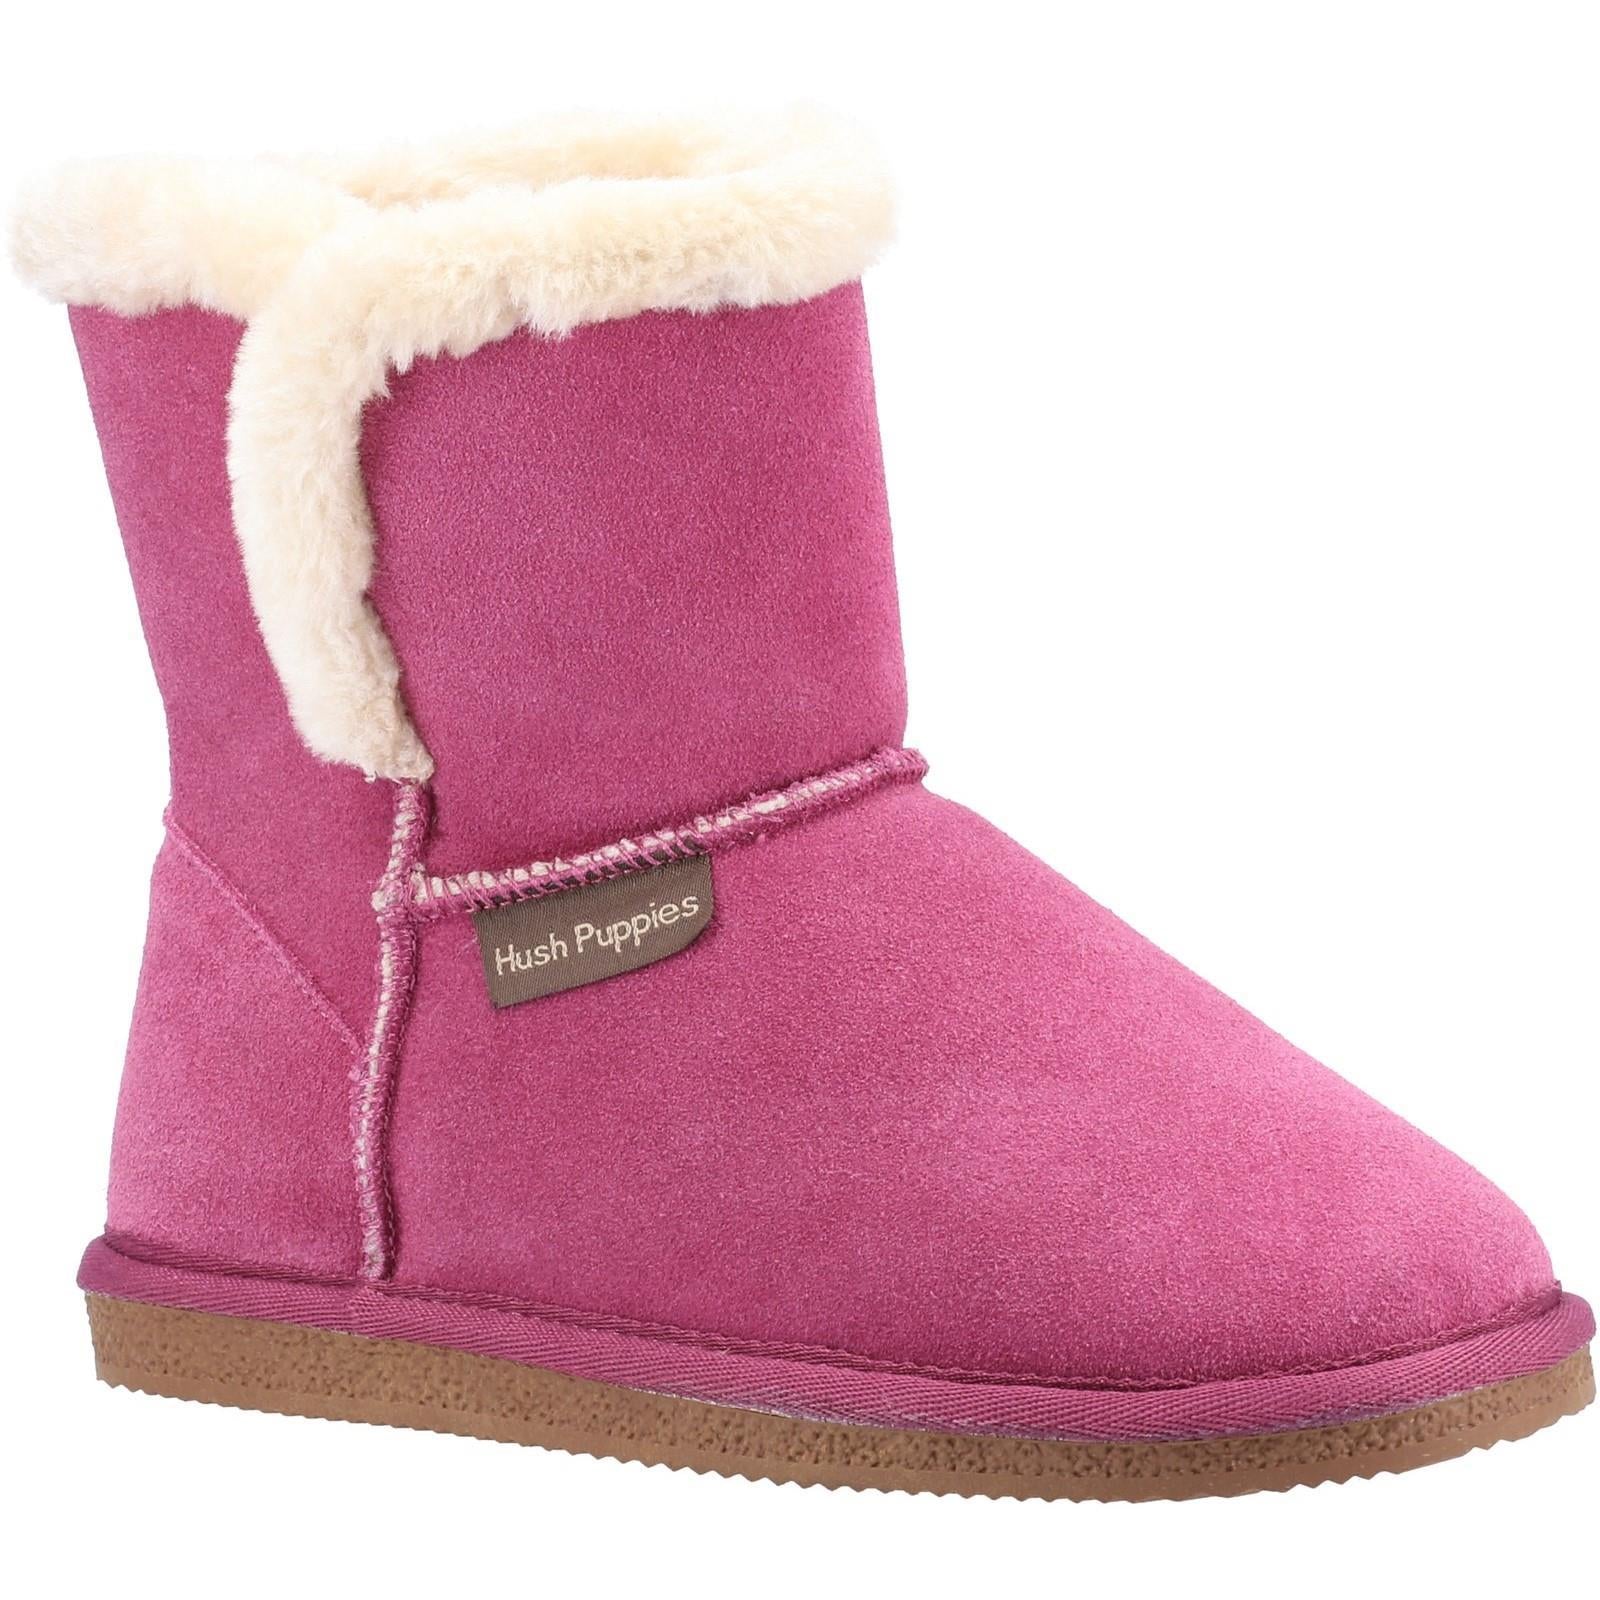 Hush Puppies Ashleigh rose pink memory foam warm fur lined slipper boots